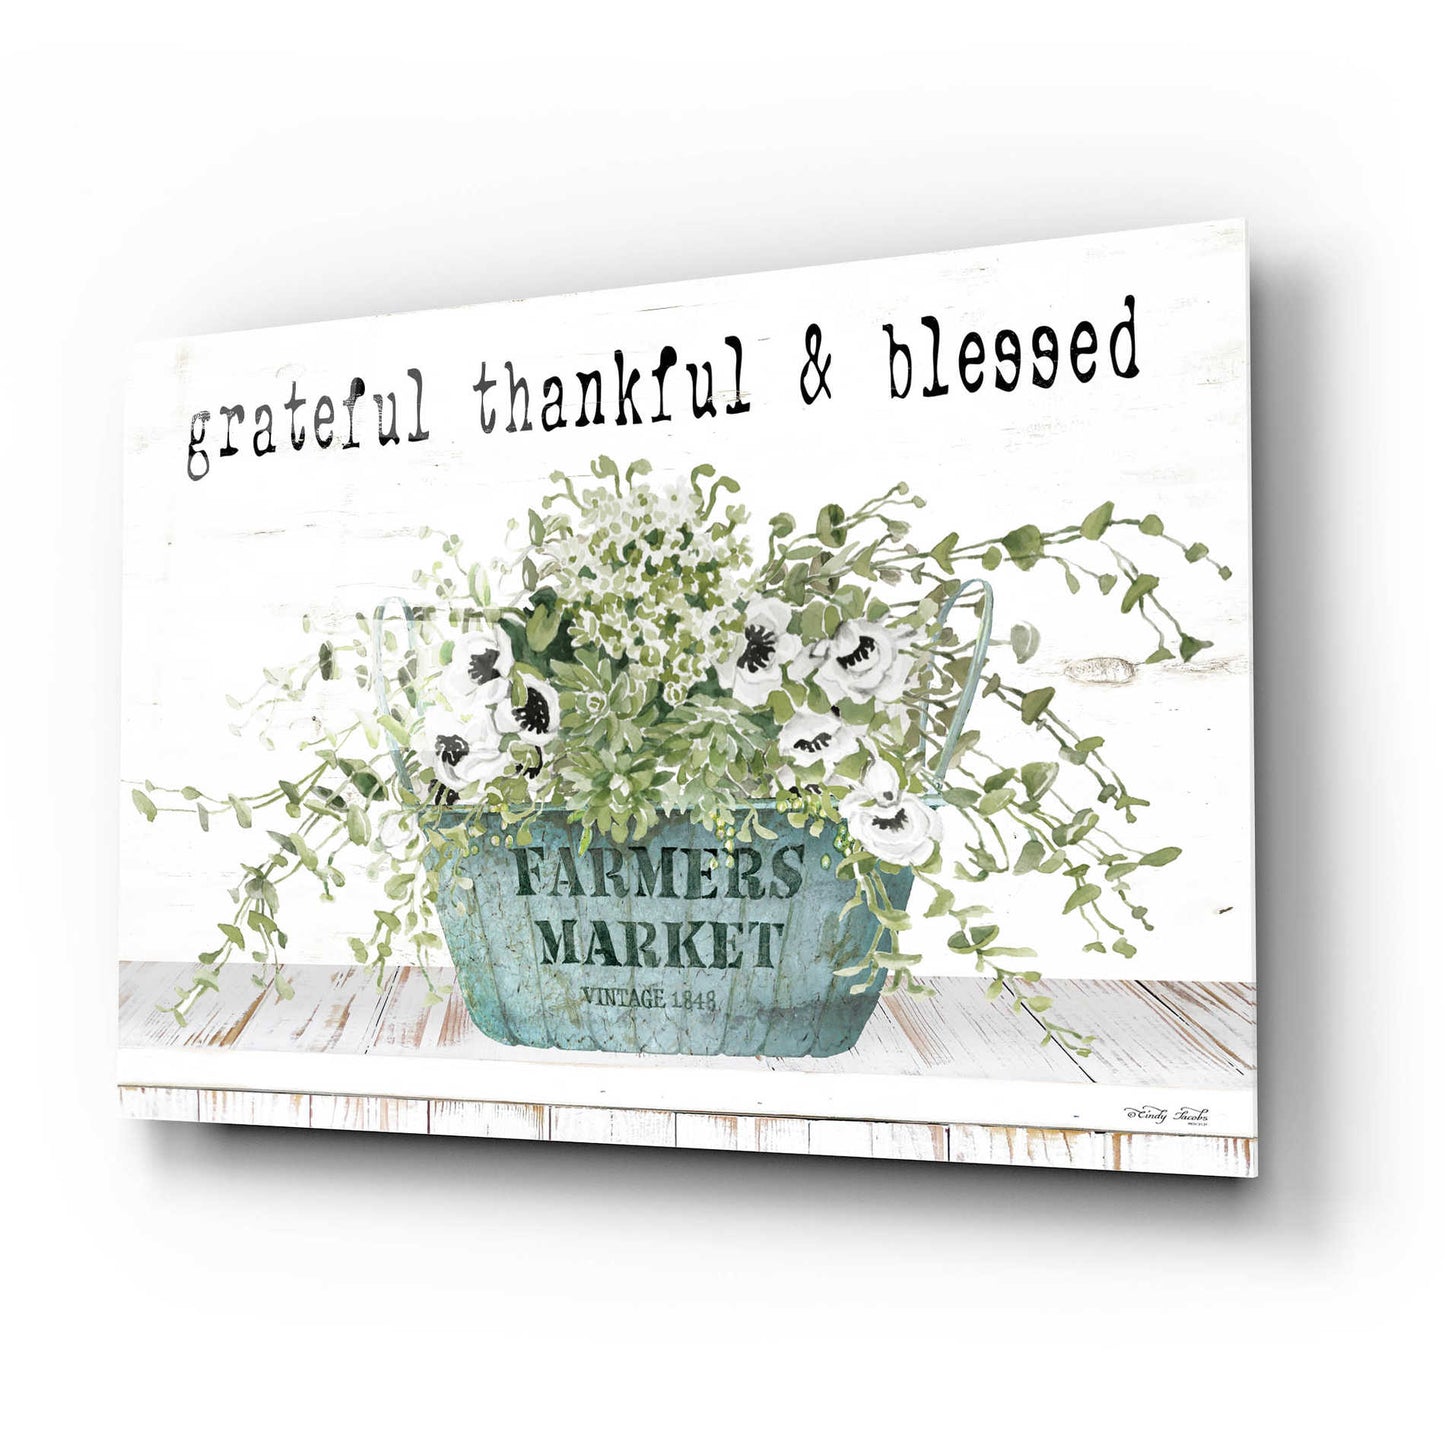 Epic Art 'Grateful Thankful & Blessed' by Cindy Jacobs, Acrylic Glass Wall Art,24x16